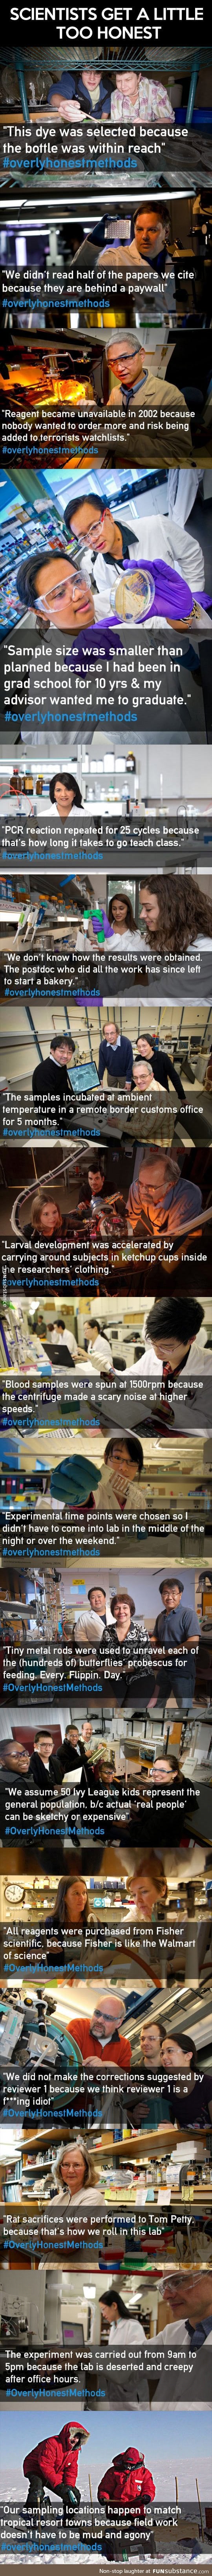 Scientists confessing the truth about their methods